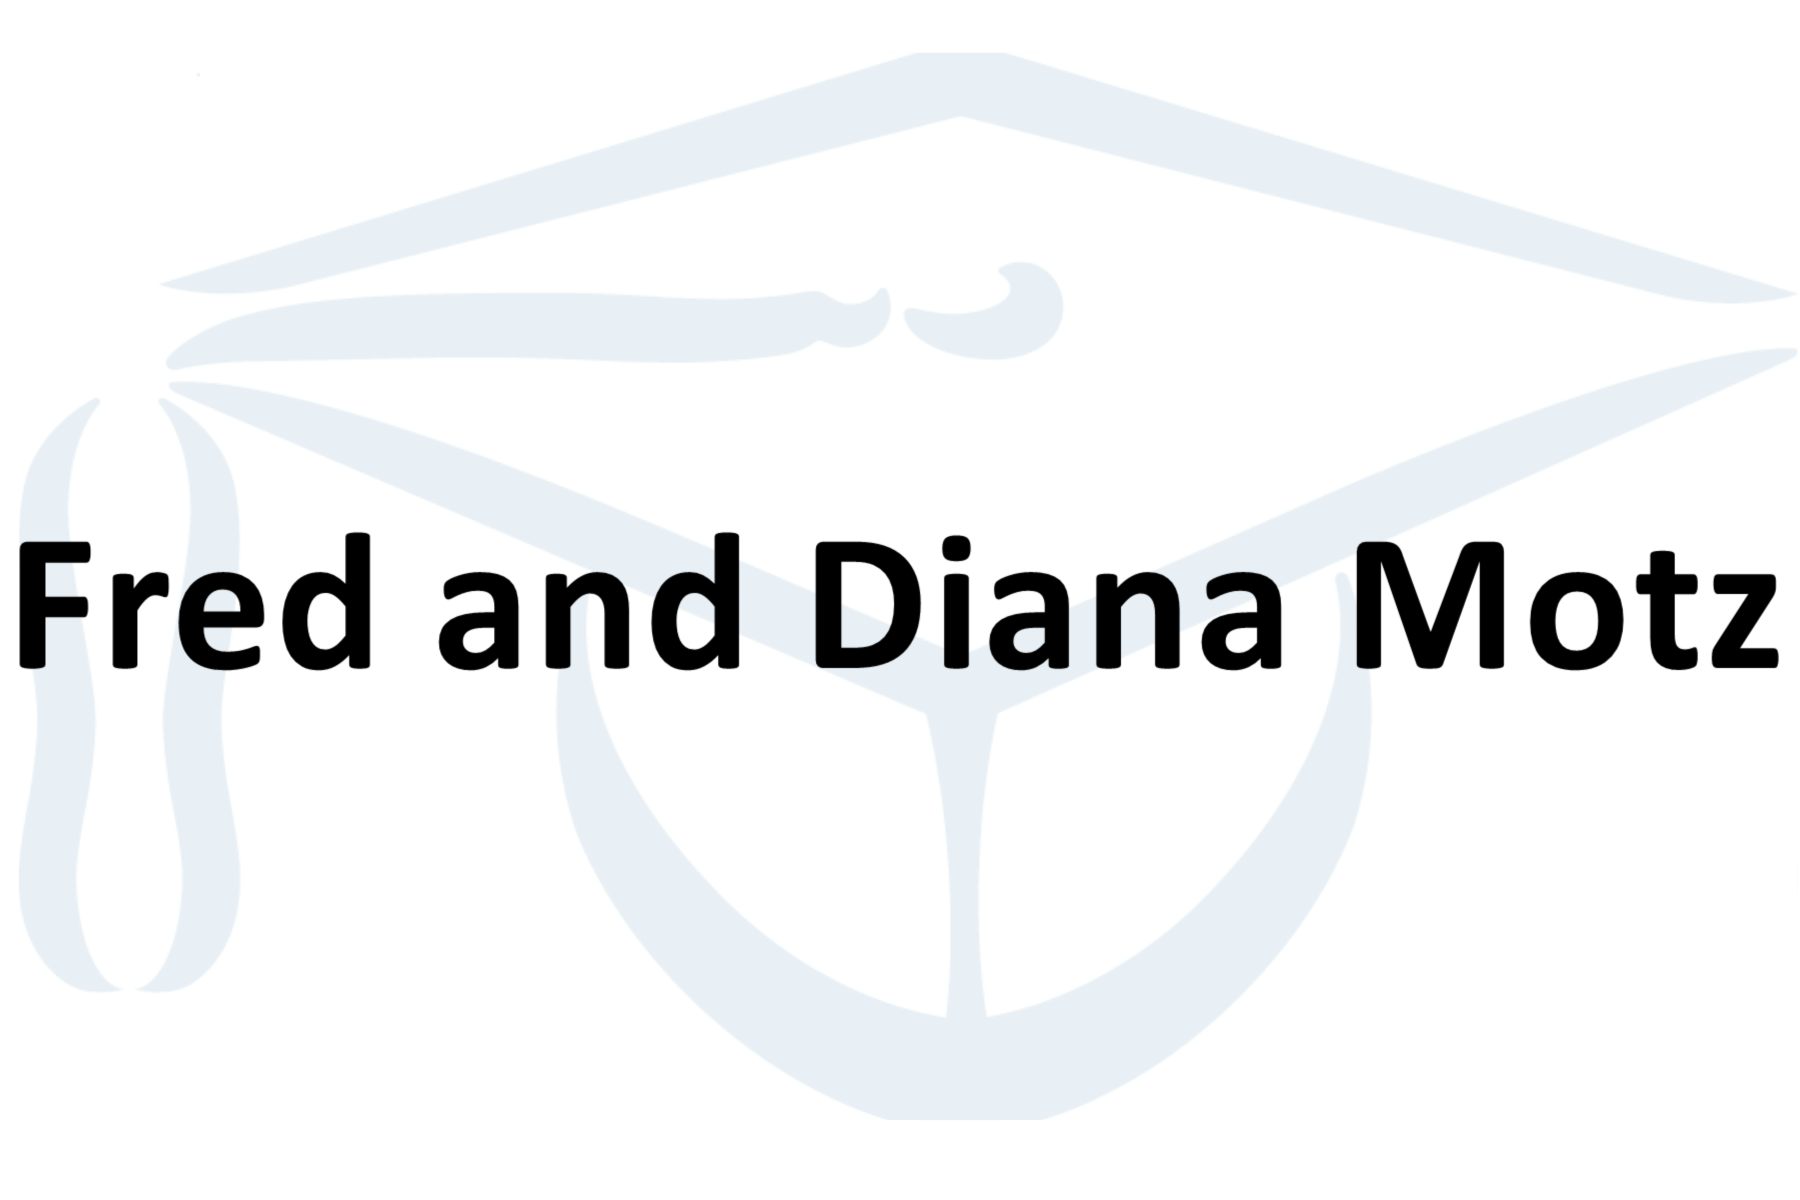 Fred and Diana Motz